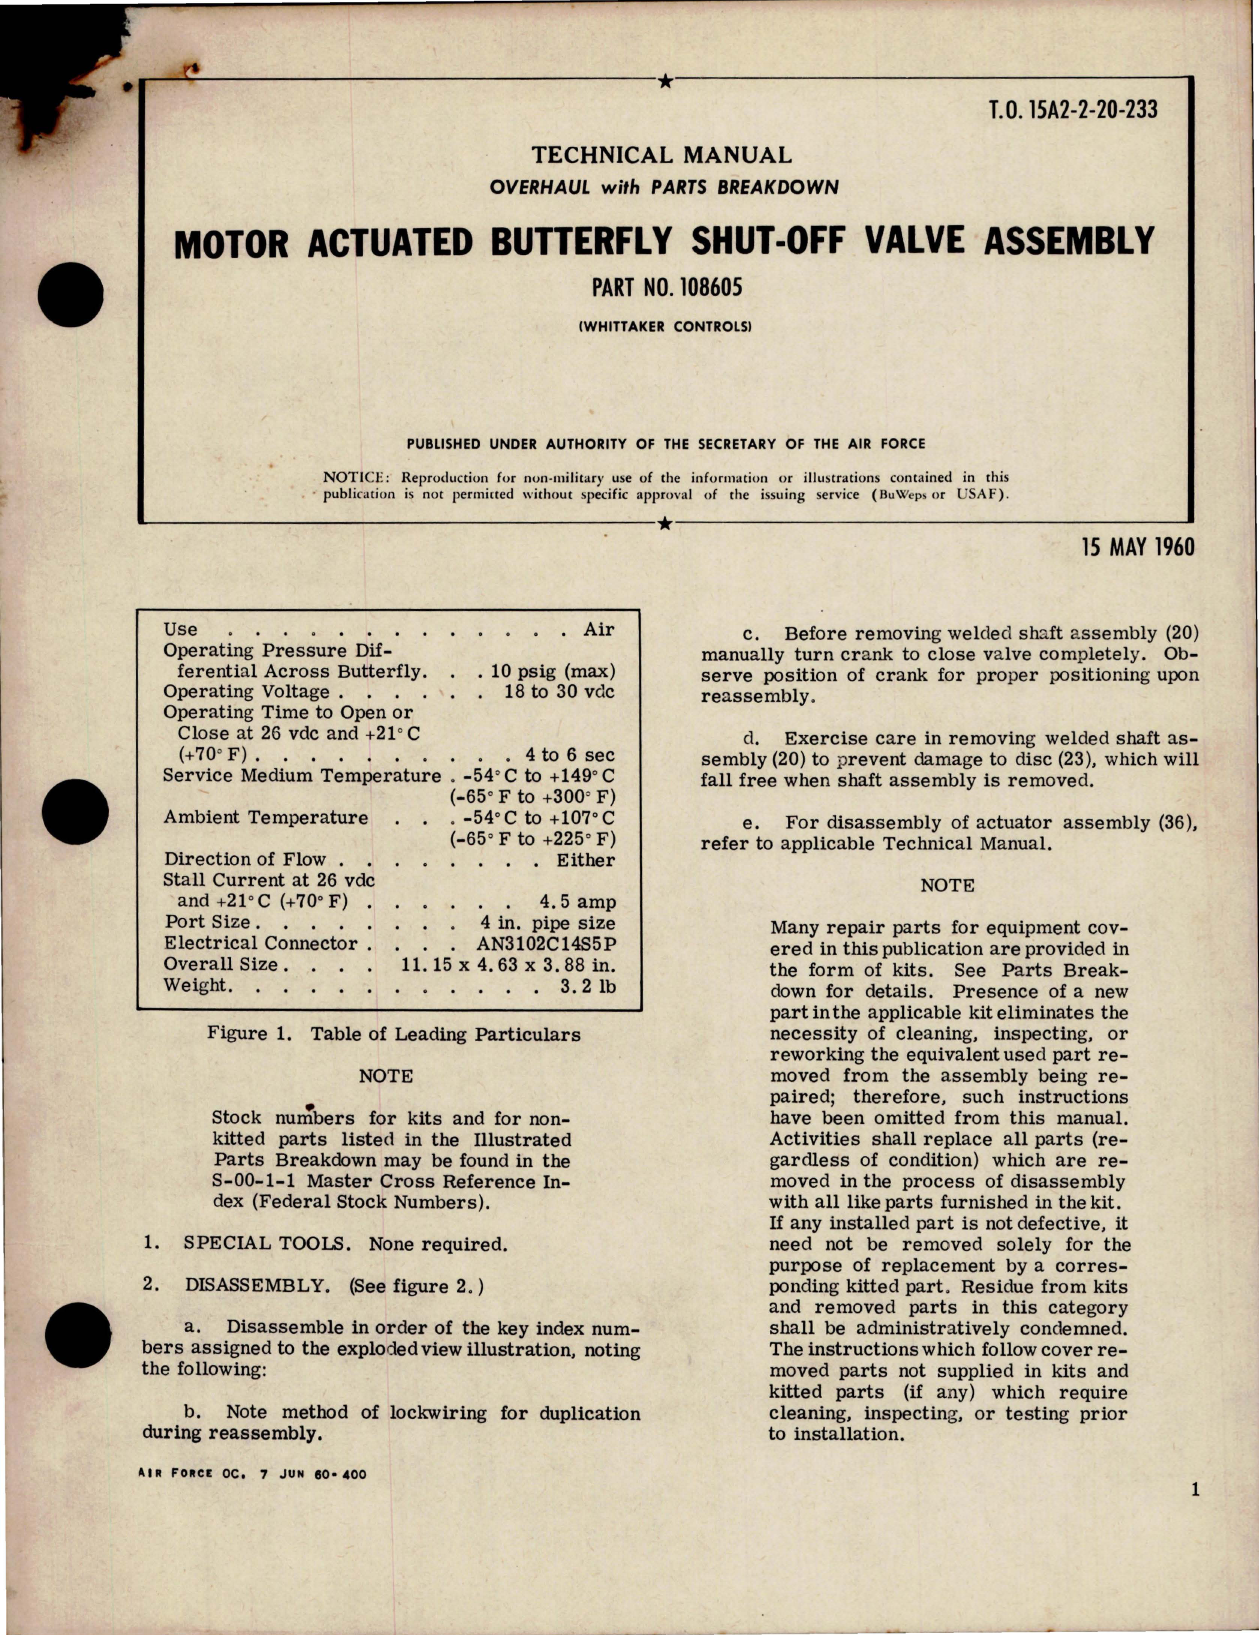 Sample page 1 from AirCorps Library document: Overhaul Manual w Parts Breakdown for Motor Actuated Butterfly Shut-Off Valve Assembly